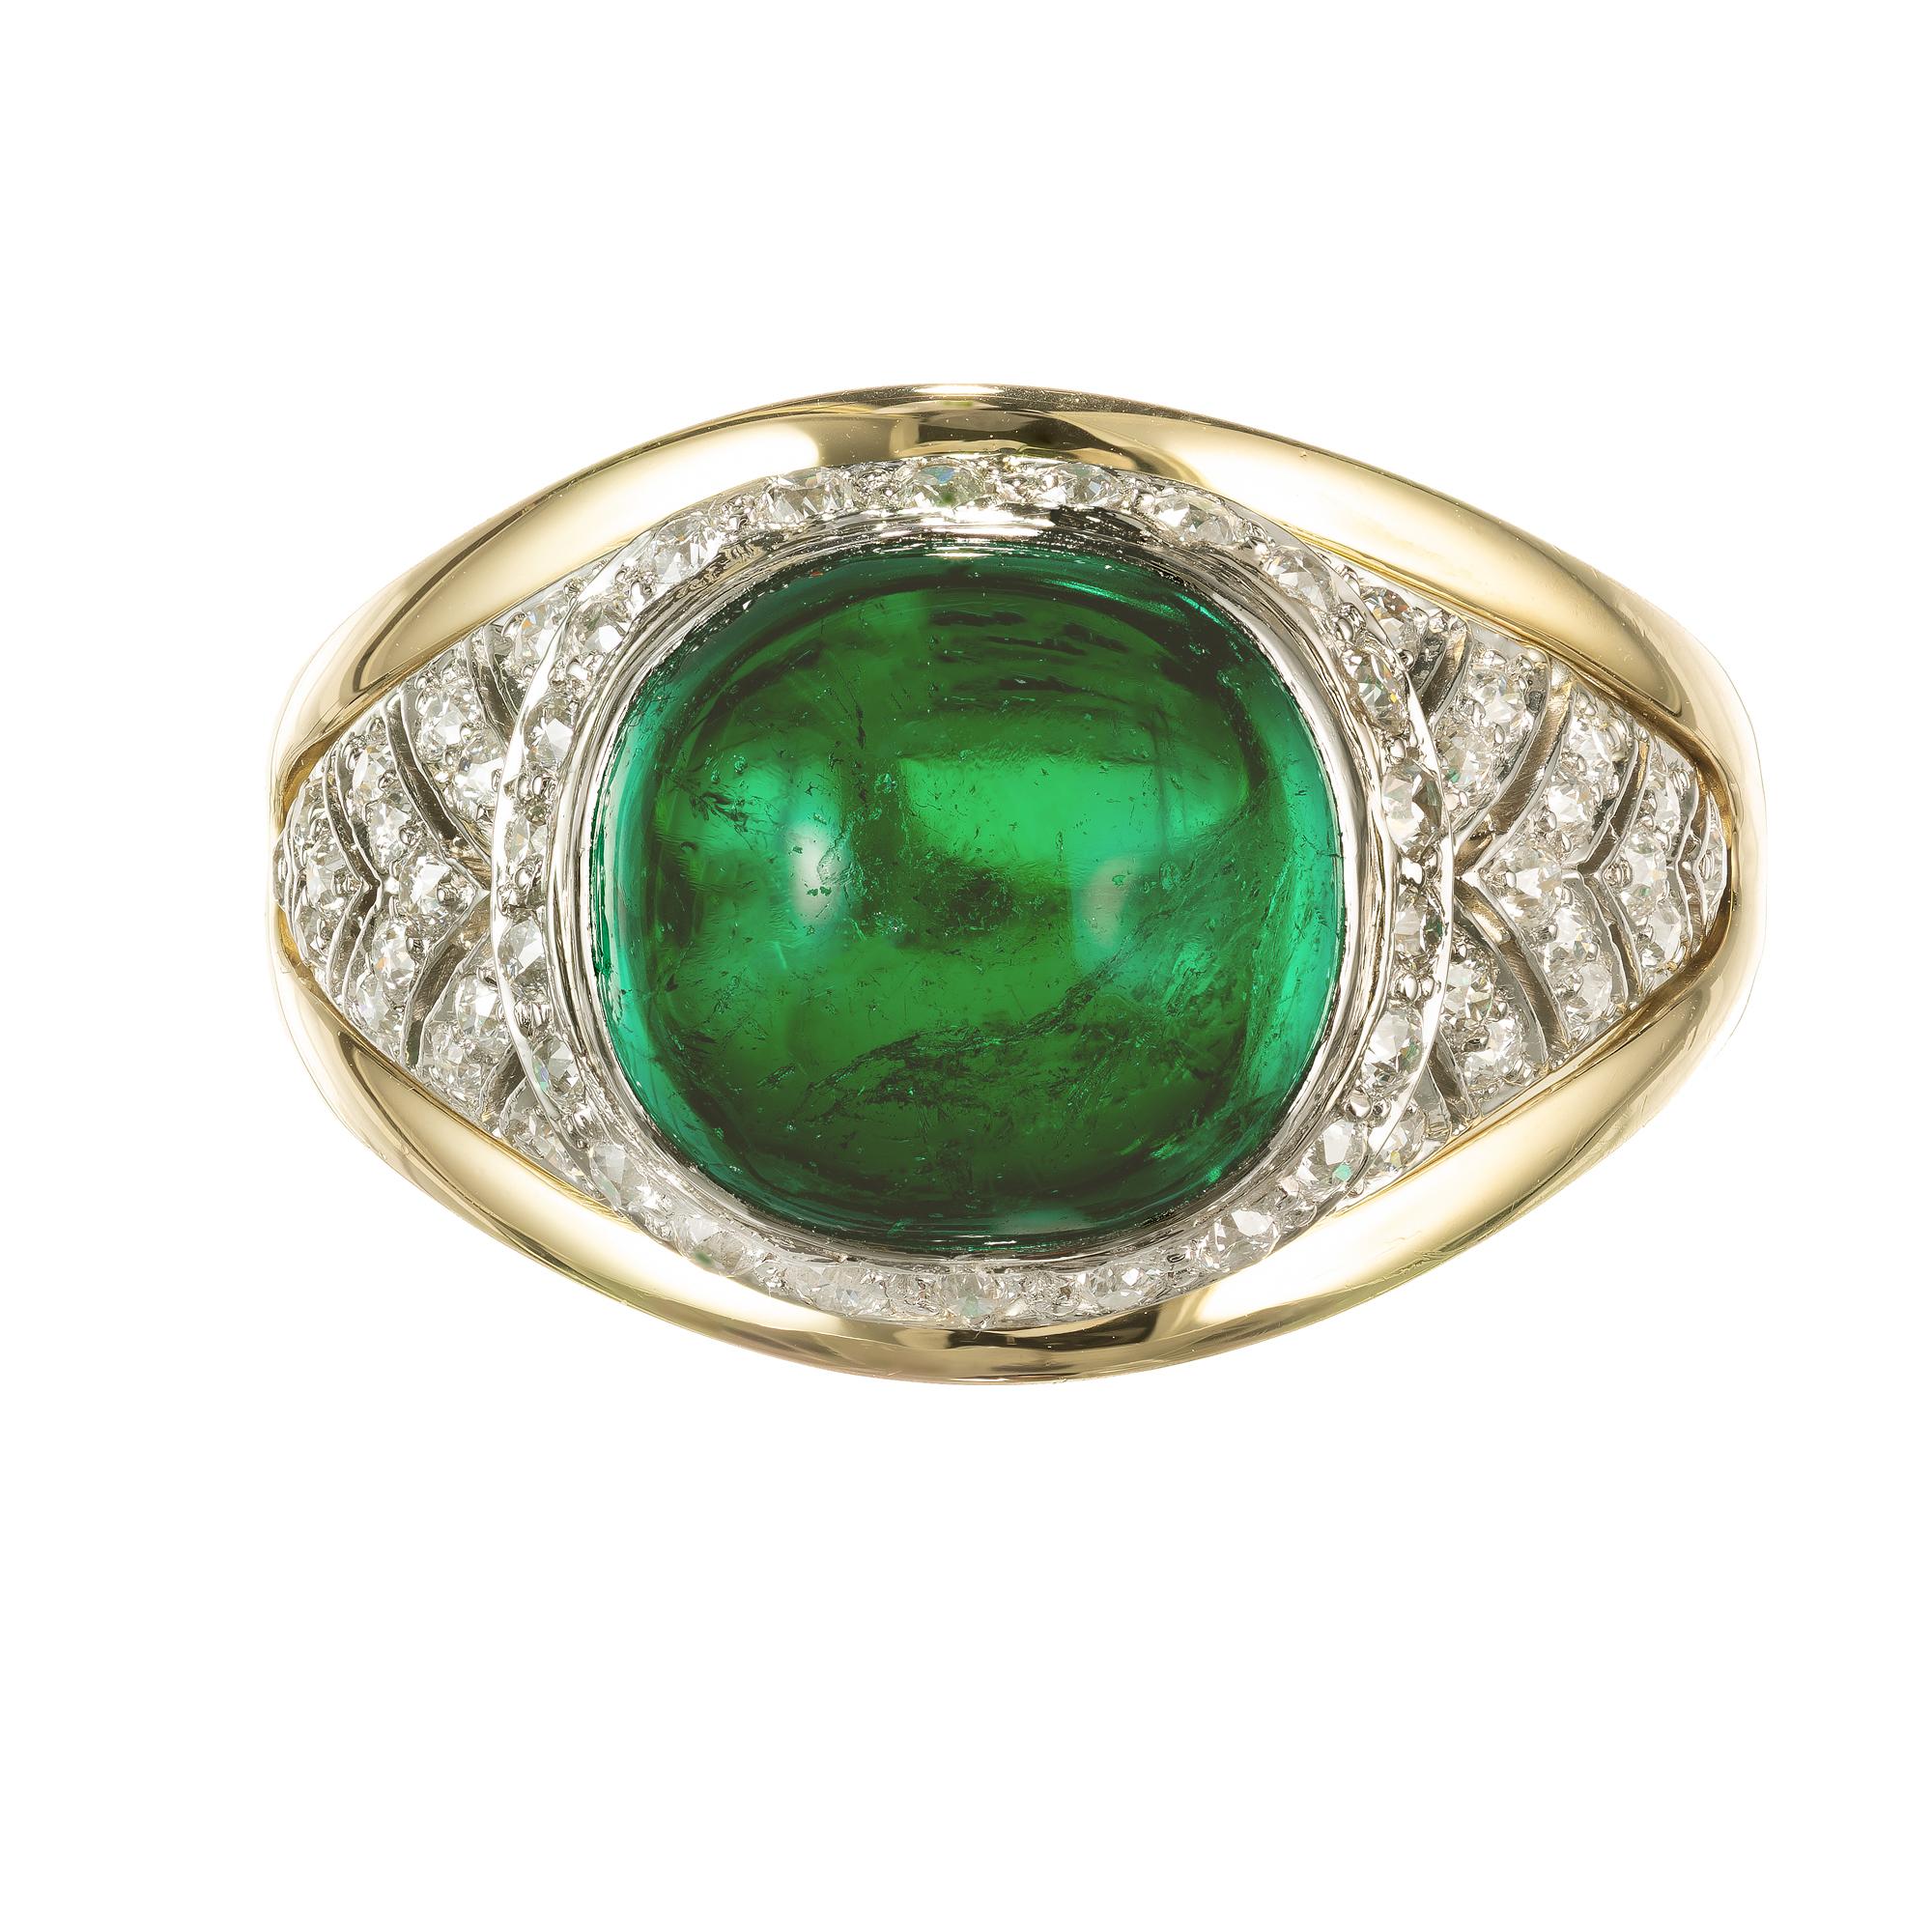 Handmade Colombian vivid green Emerald and diamond ring. Cabochon GIA certified center stone with 52 round old european cut diamonds. Natural minor surface abrasions. Handmade 18k yellow gold and platinum setting. 

1 vivid green cushion cabochon